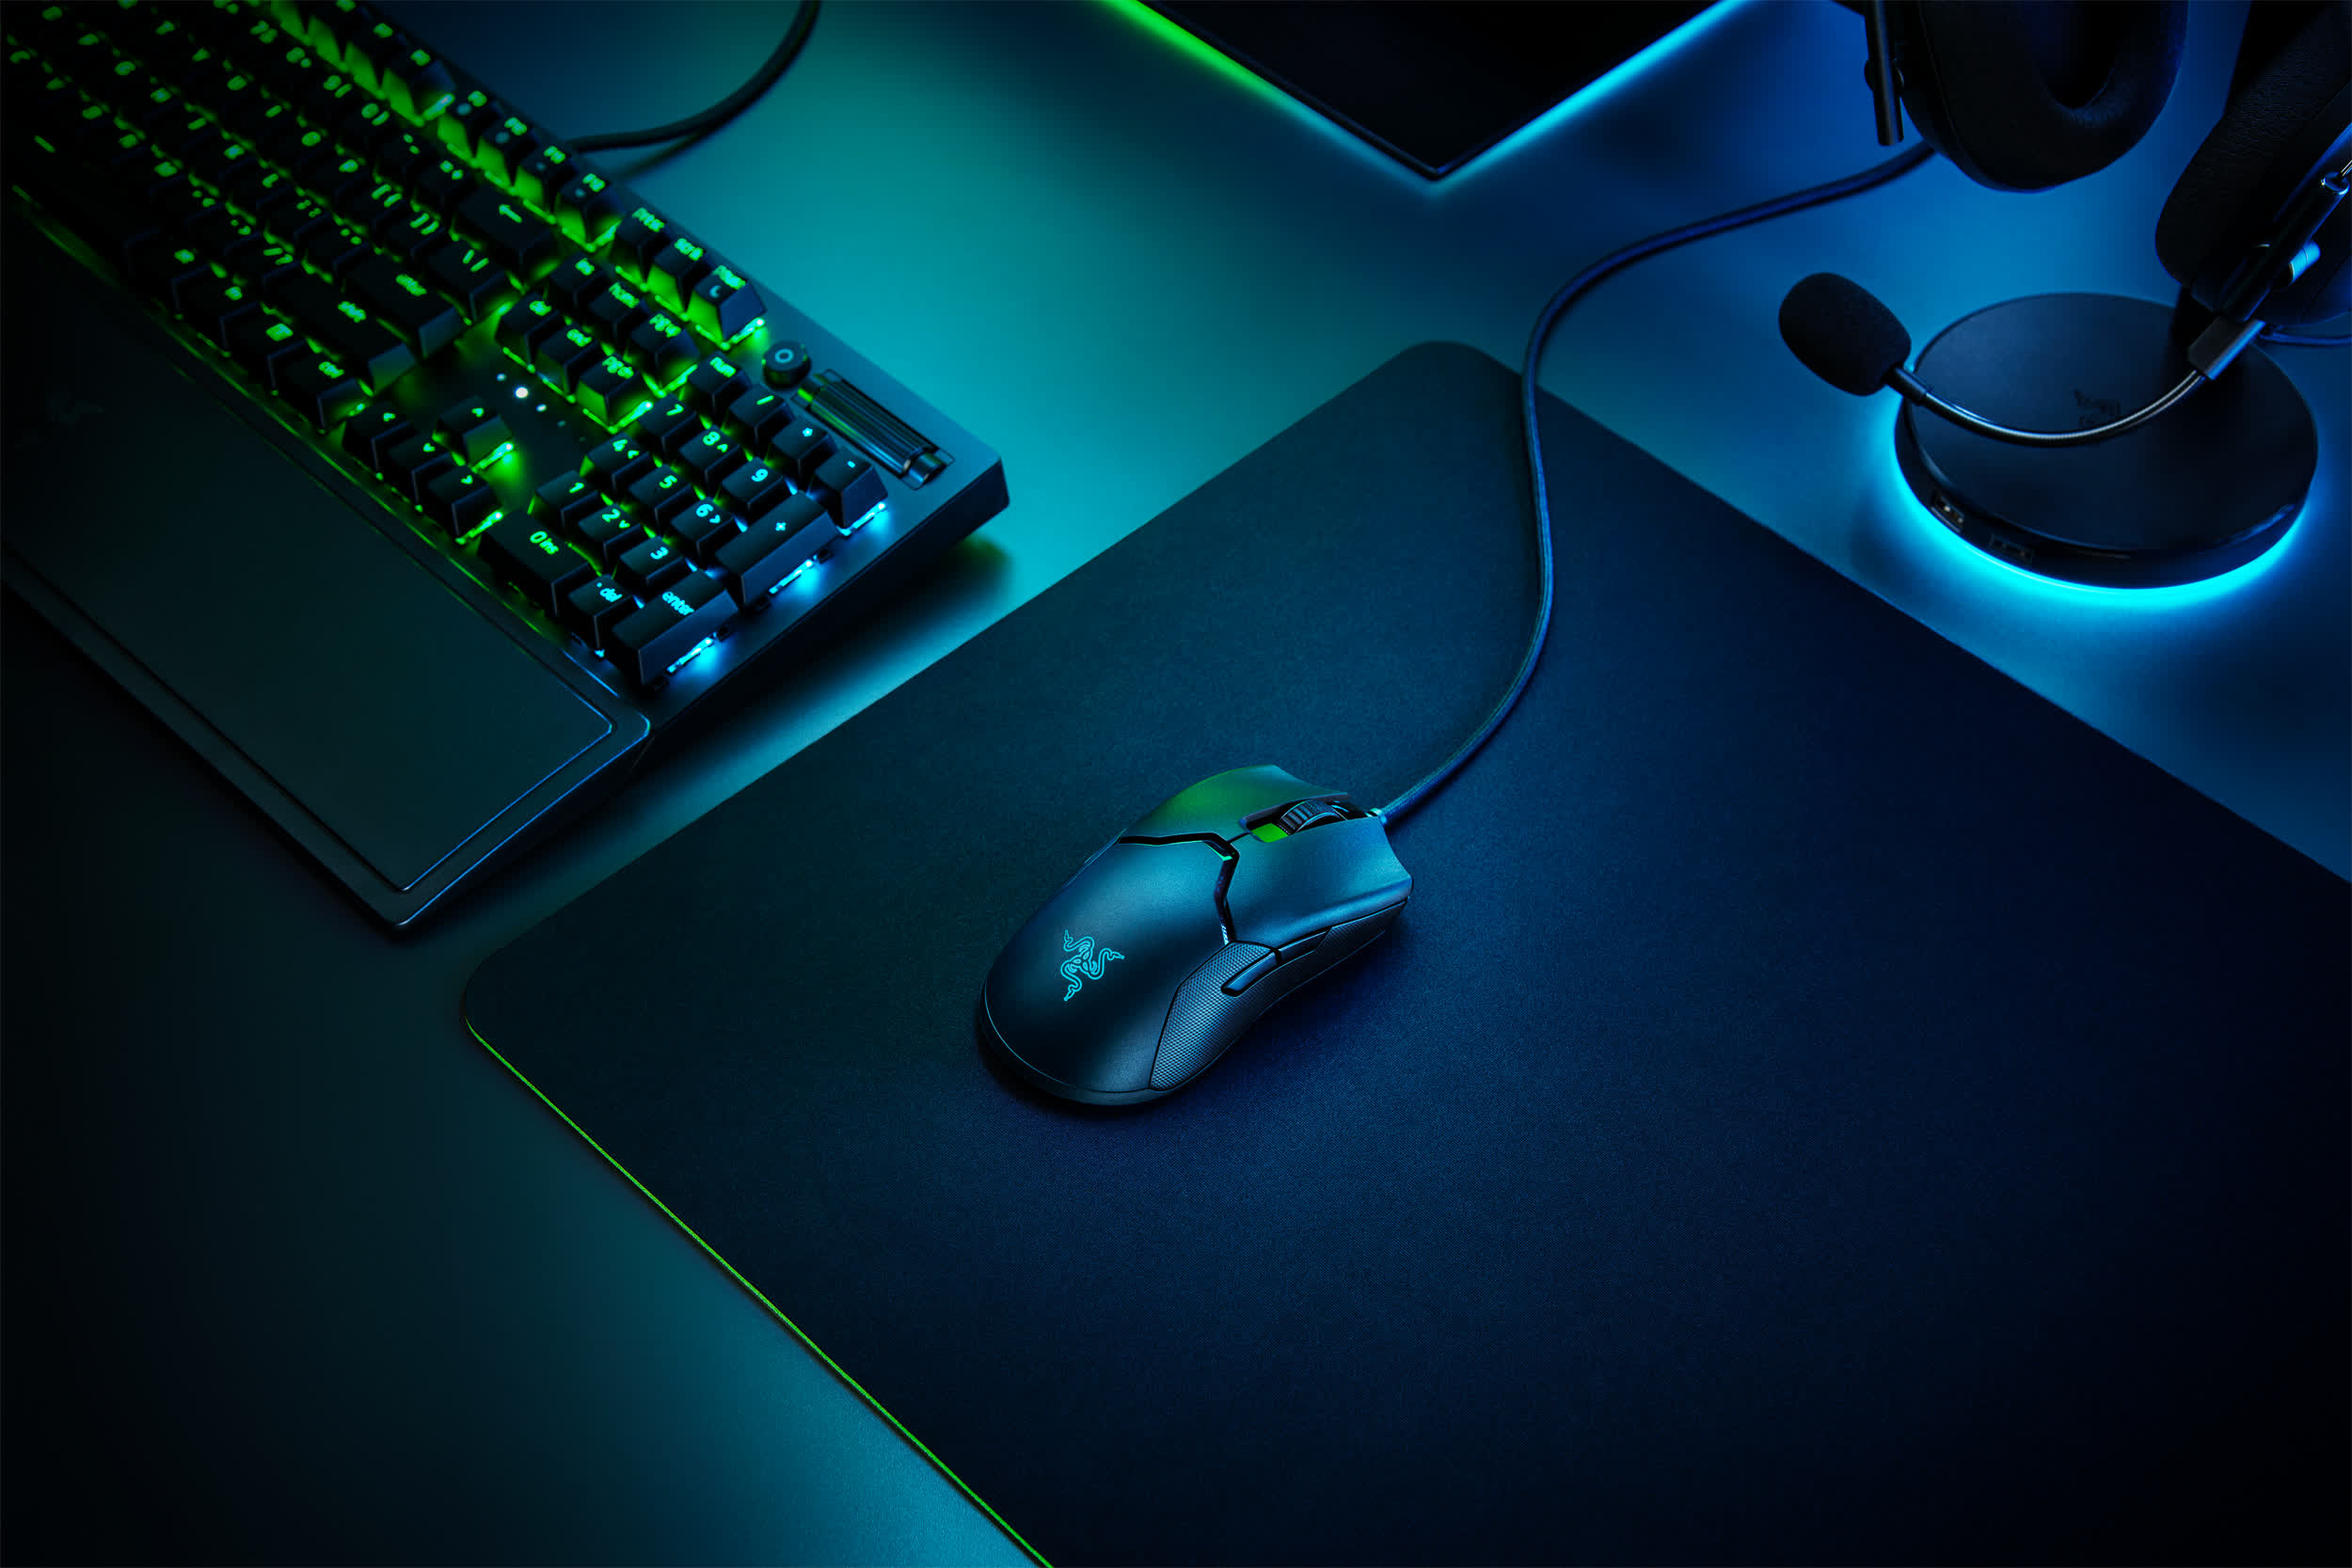 Razer's new Viper 8K gaming mouse features true 8000Hz polling